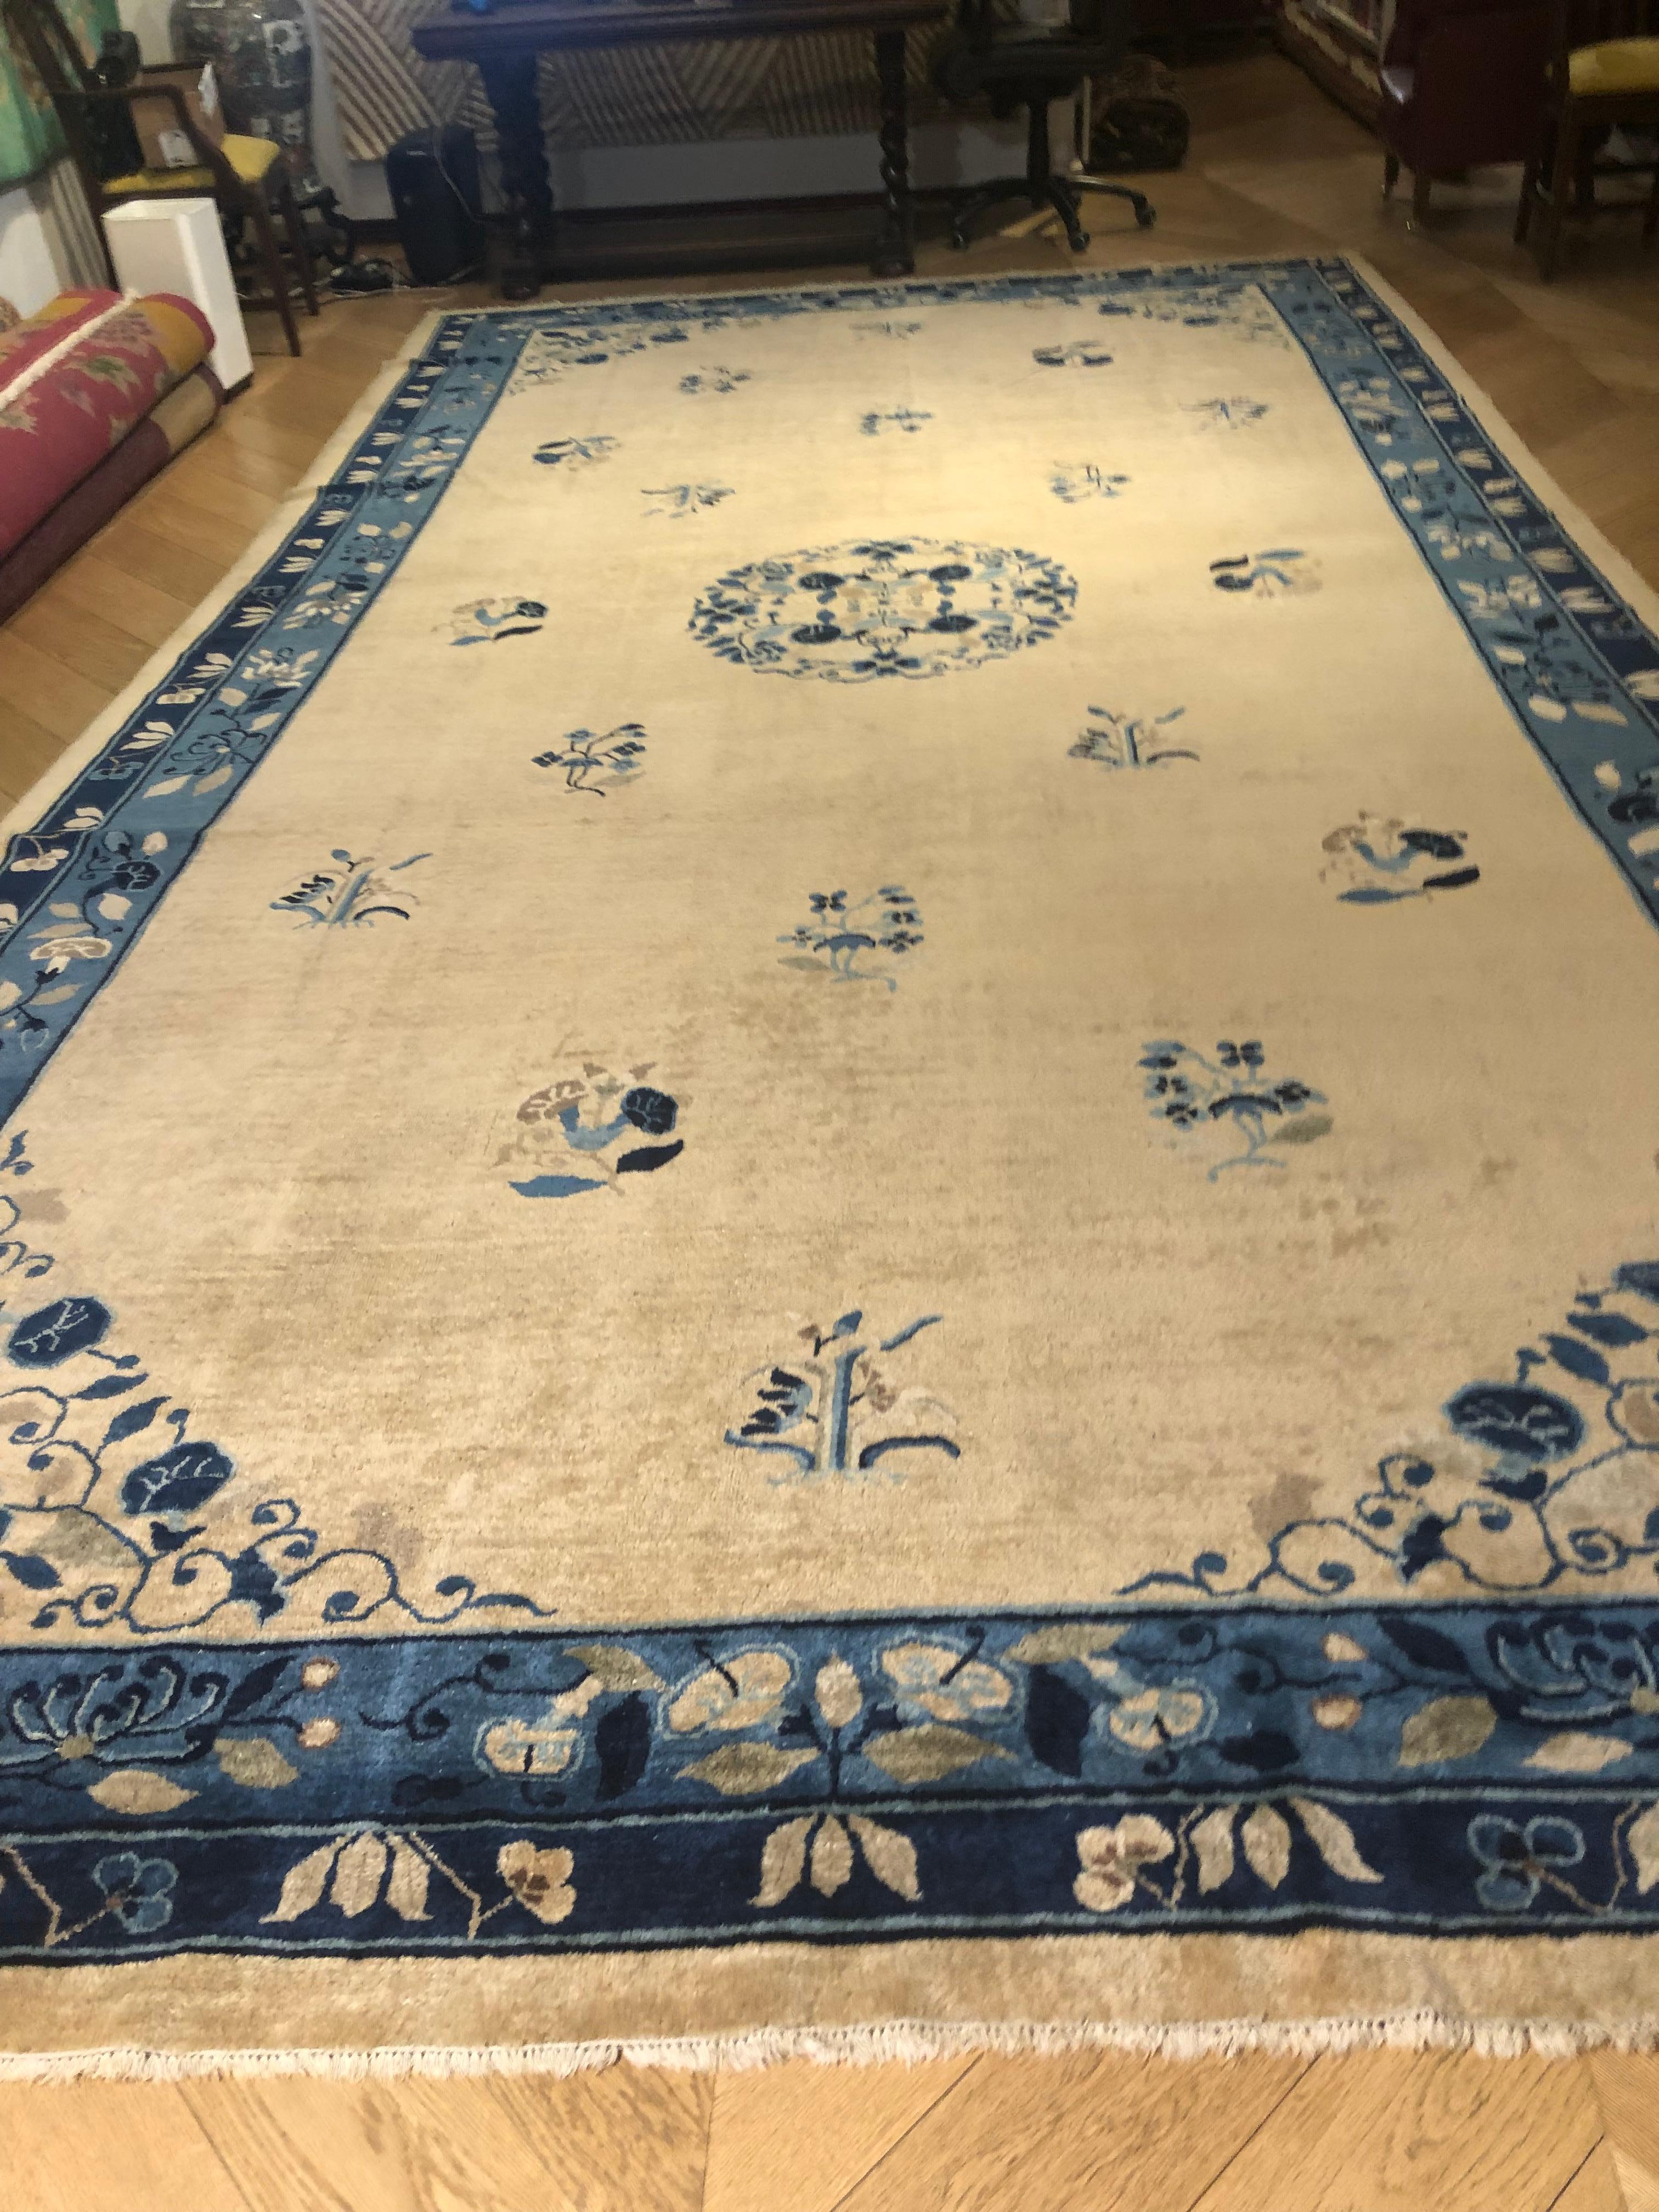 These Chinese rugs were made solely for the residences of court dignitaries. In China, the carpet is only a furnishing element that gives richness and beauty to the rooms. The decoration and colors, which come from the same inspiration as porcelain,